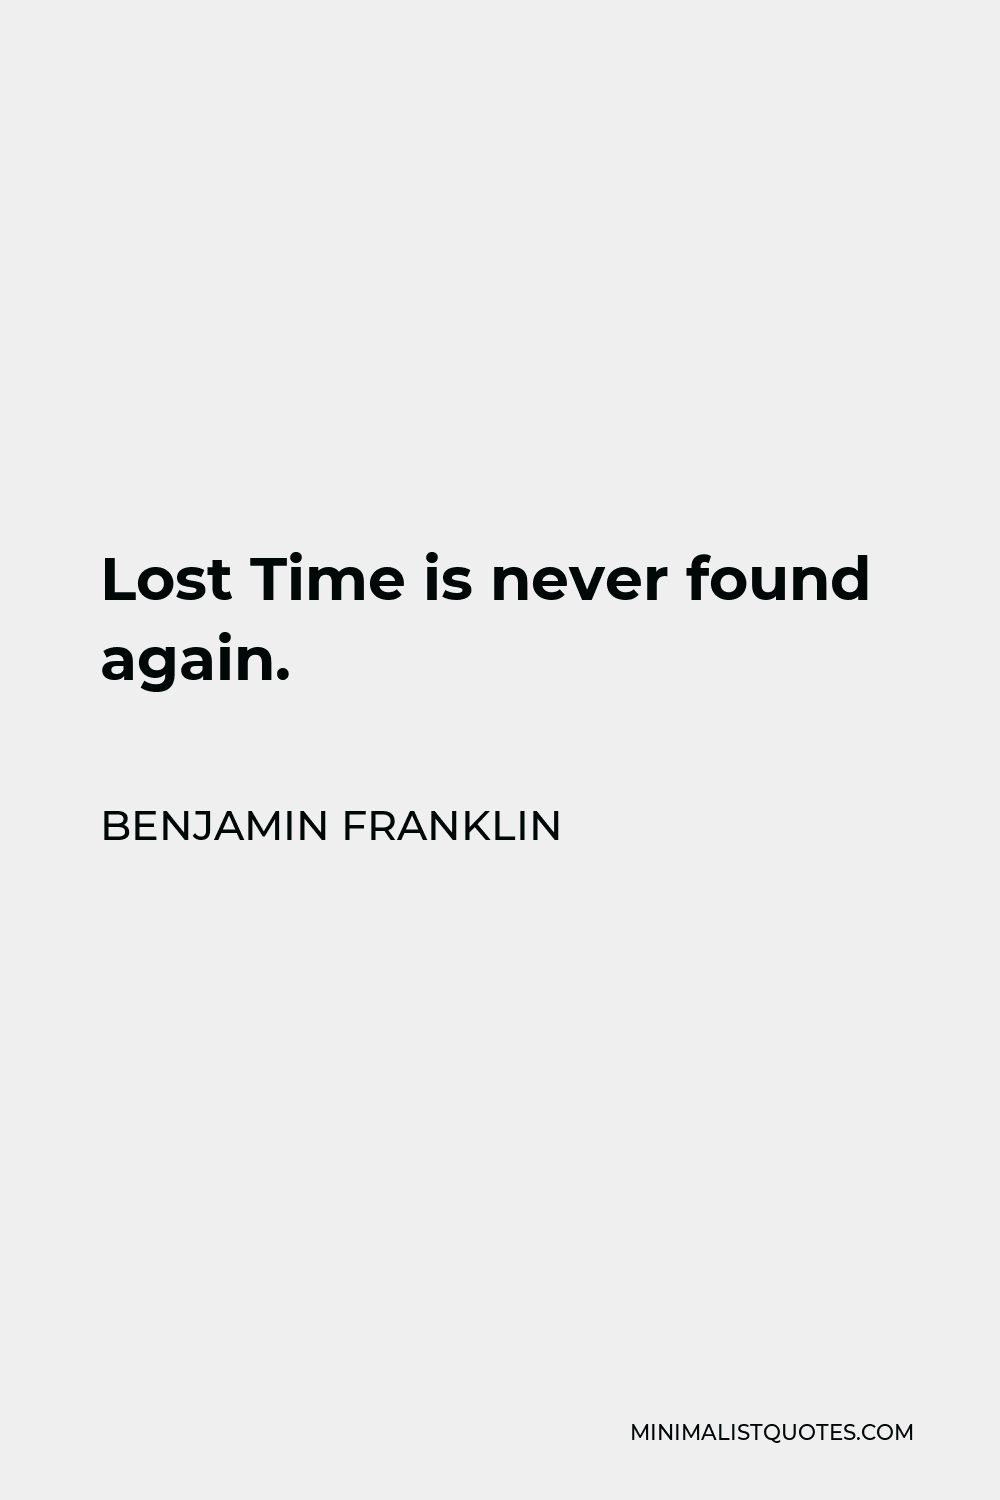 Benjamin Franklin Quote: Lost Time is never found again.